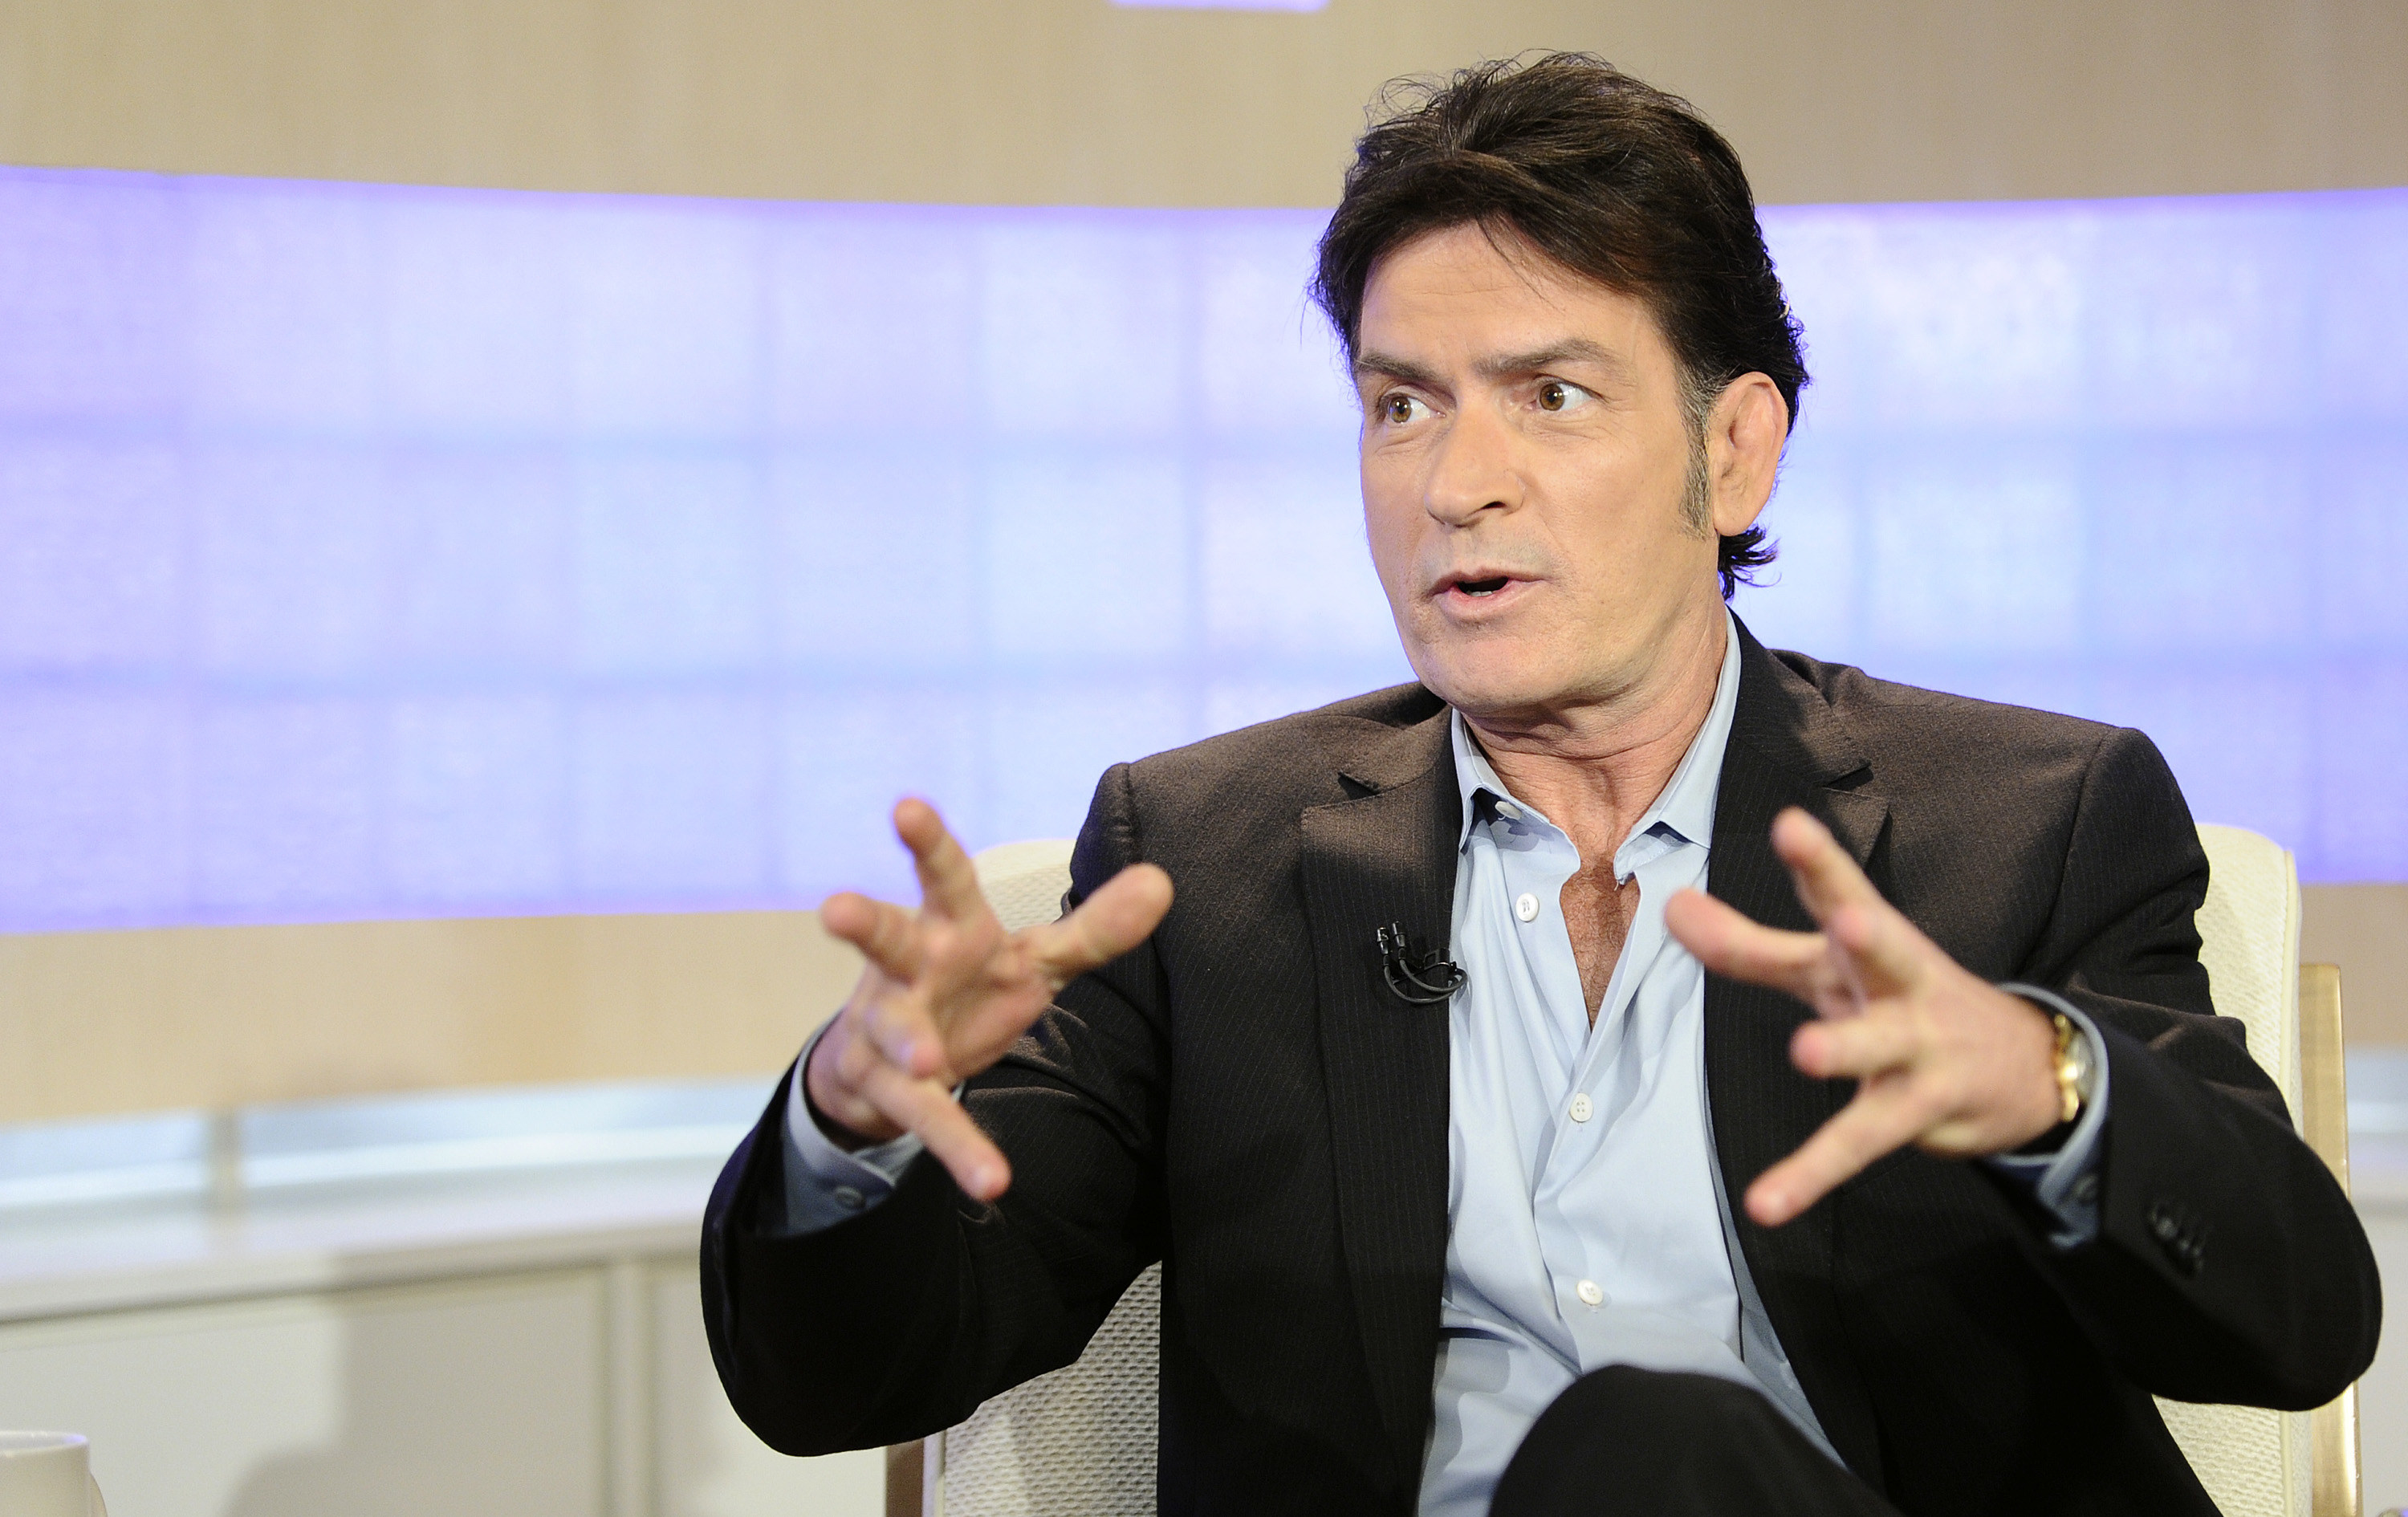 Charlie Sheen on &quot;Today&quot; in 2011